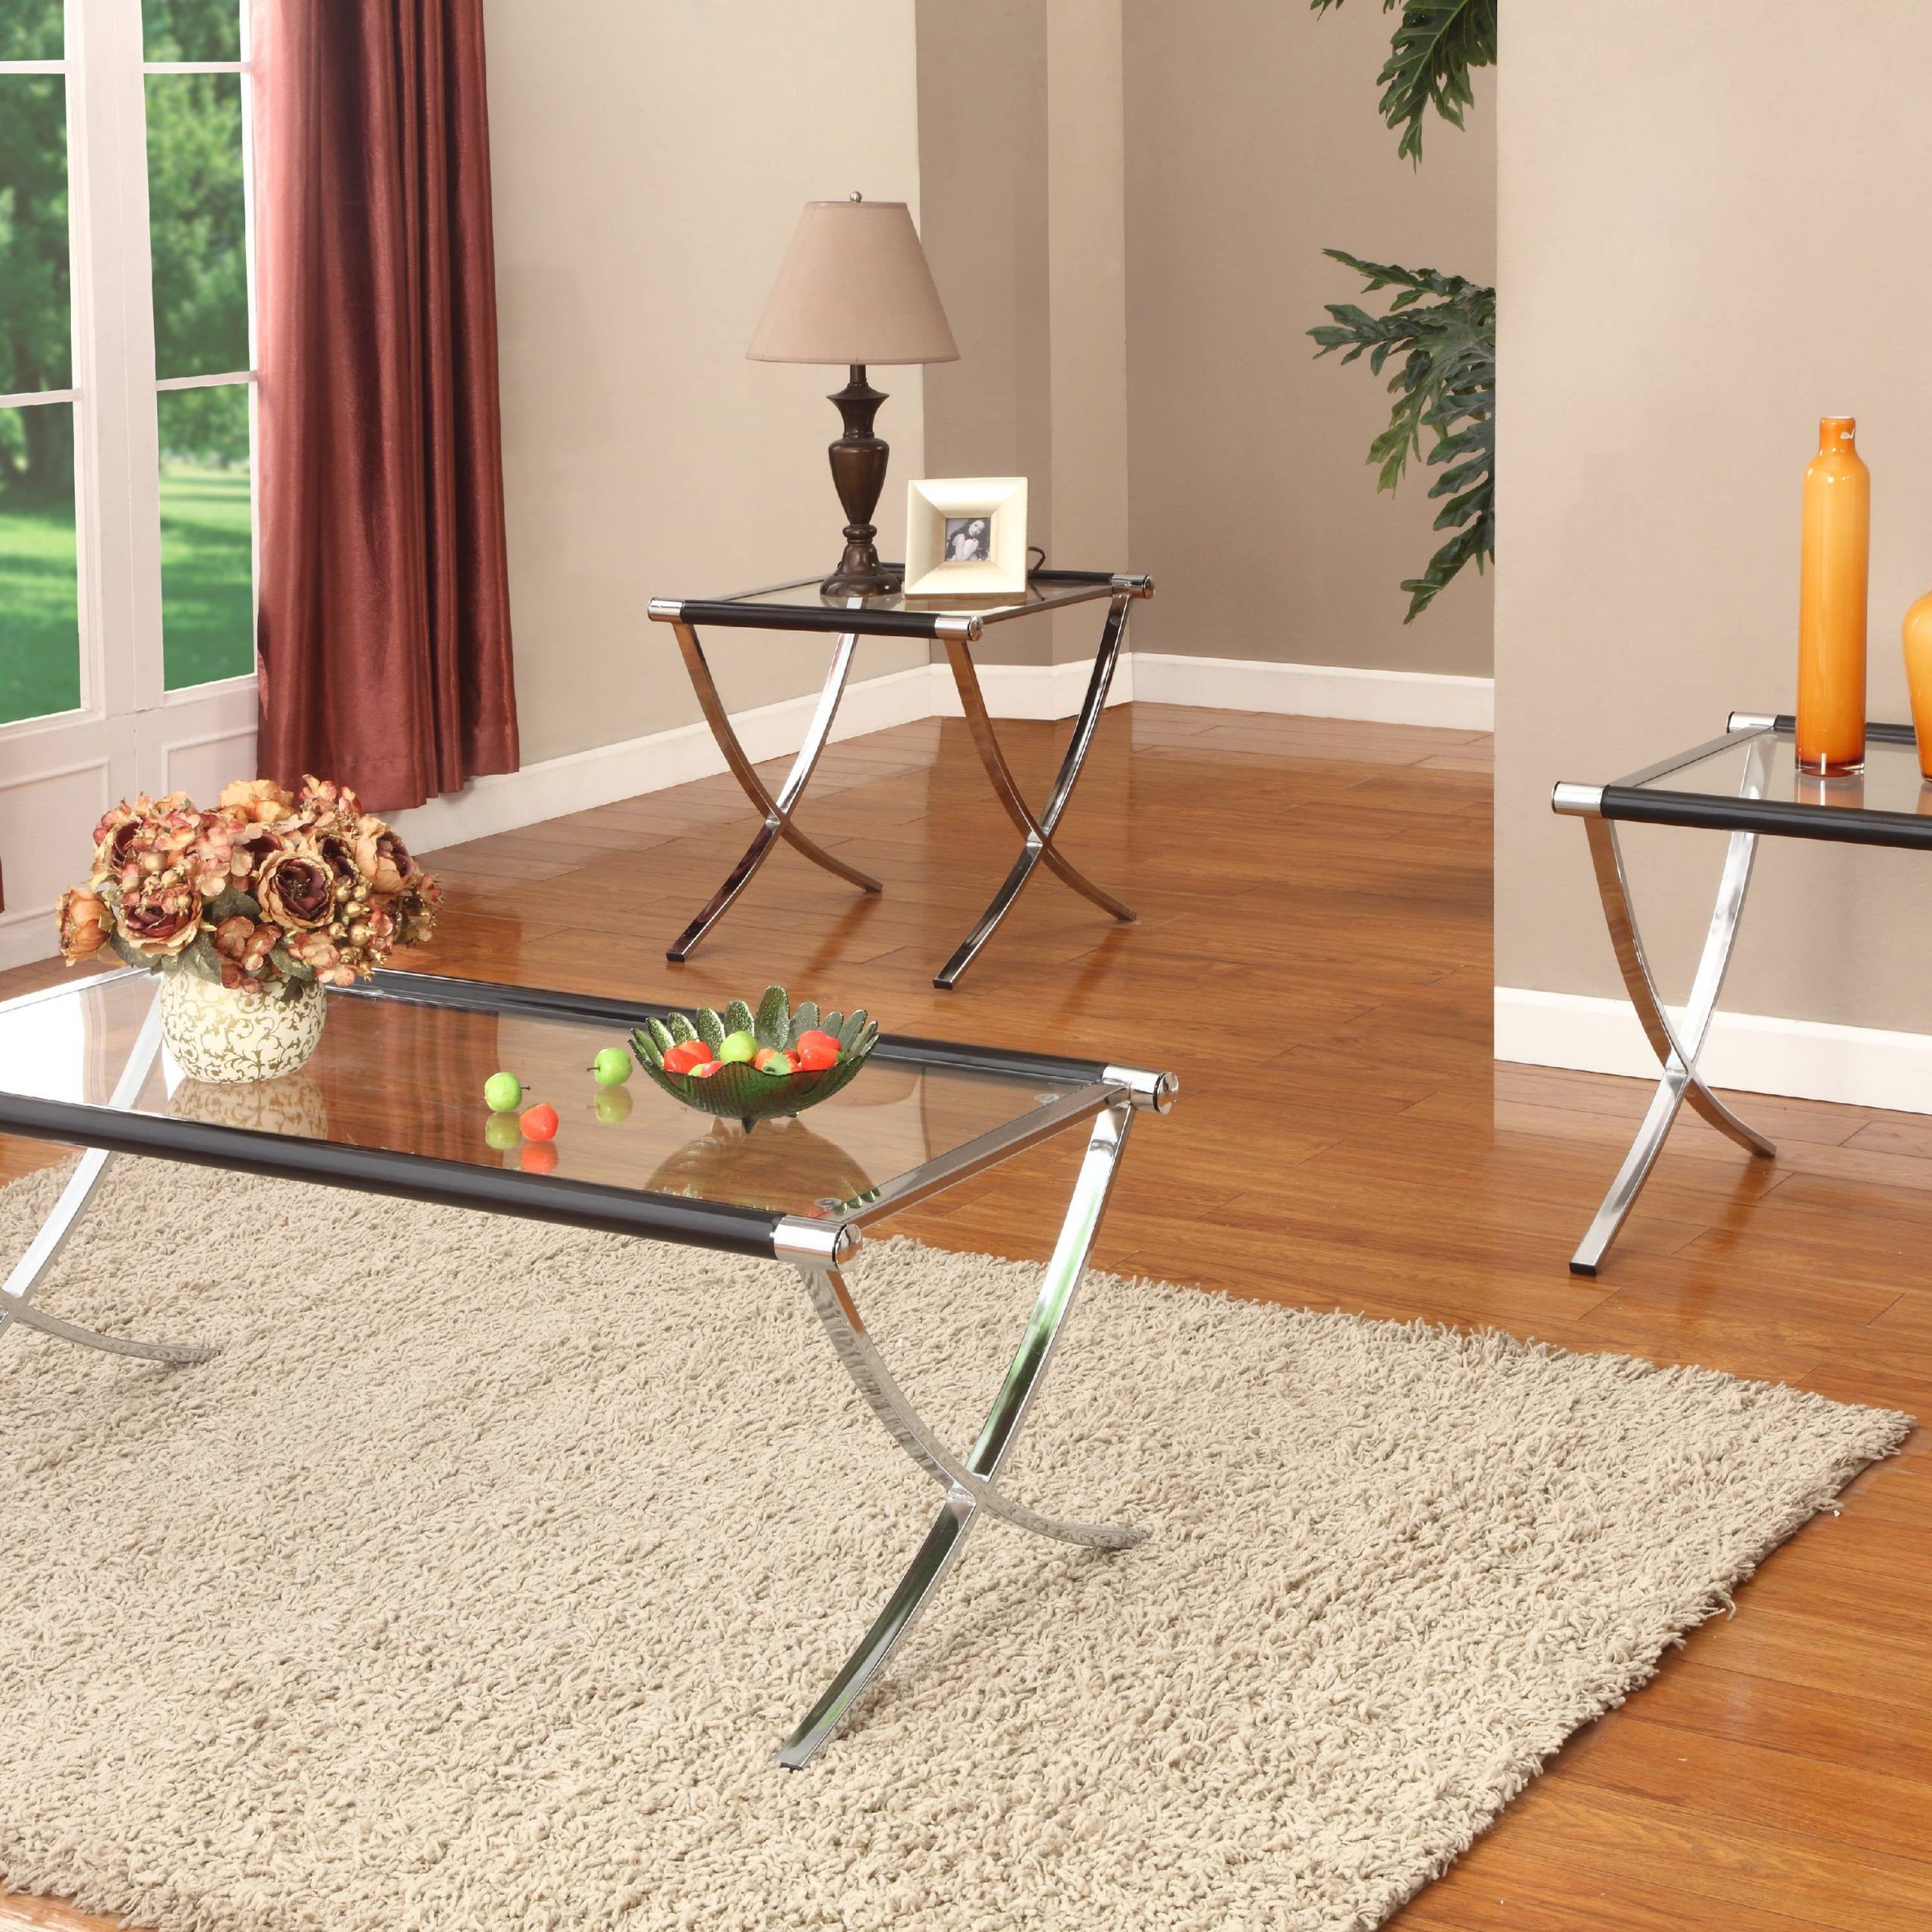 Peggie 3 Piece Coffee Table Set, Chrome Metal Frame & Tempered Glass Throughout Tempered Glass Coffee Tables (View 5 of 15)